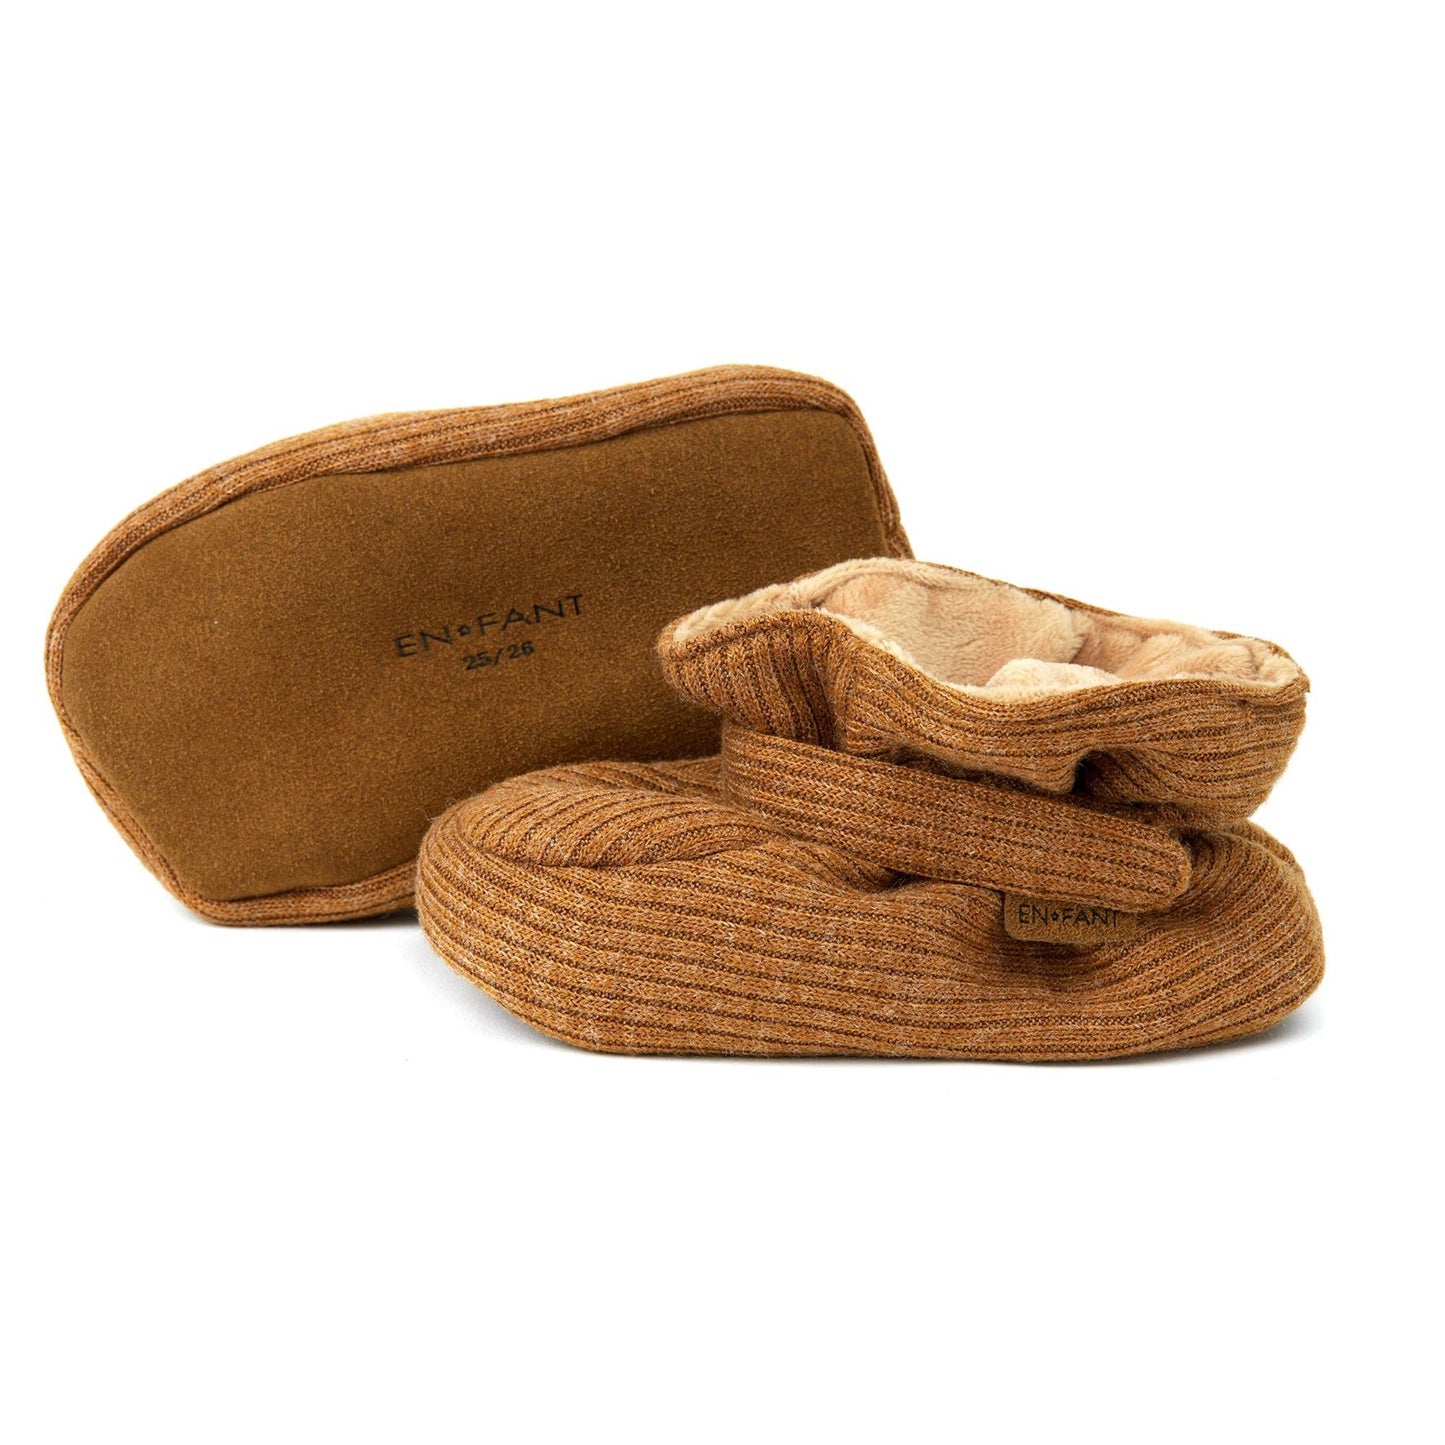 Baby Boy Brown Slippers, Comfortable Sippers for Baby